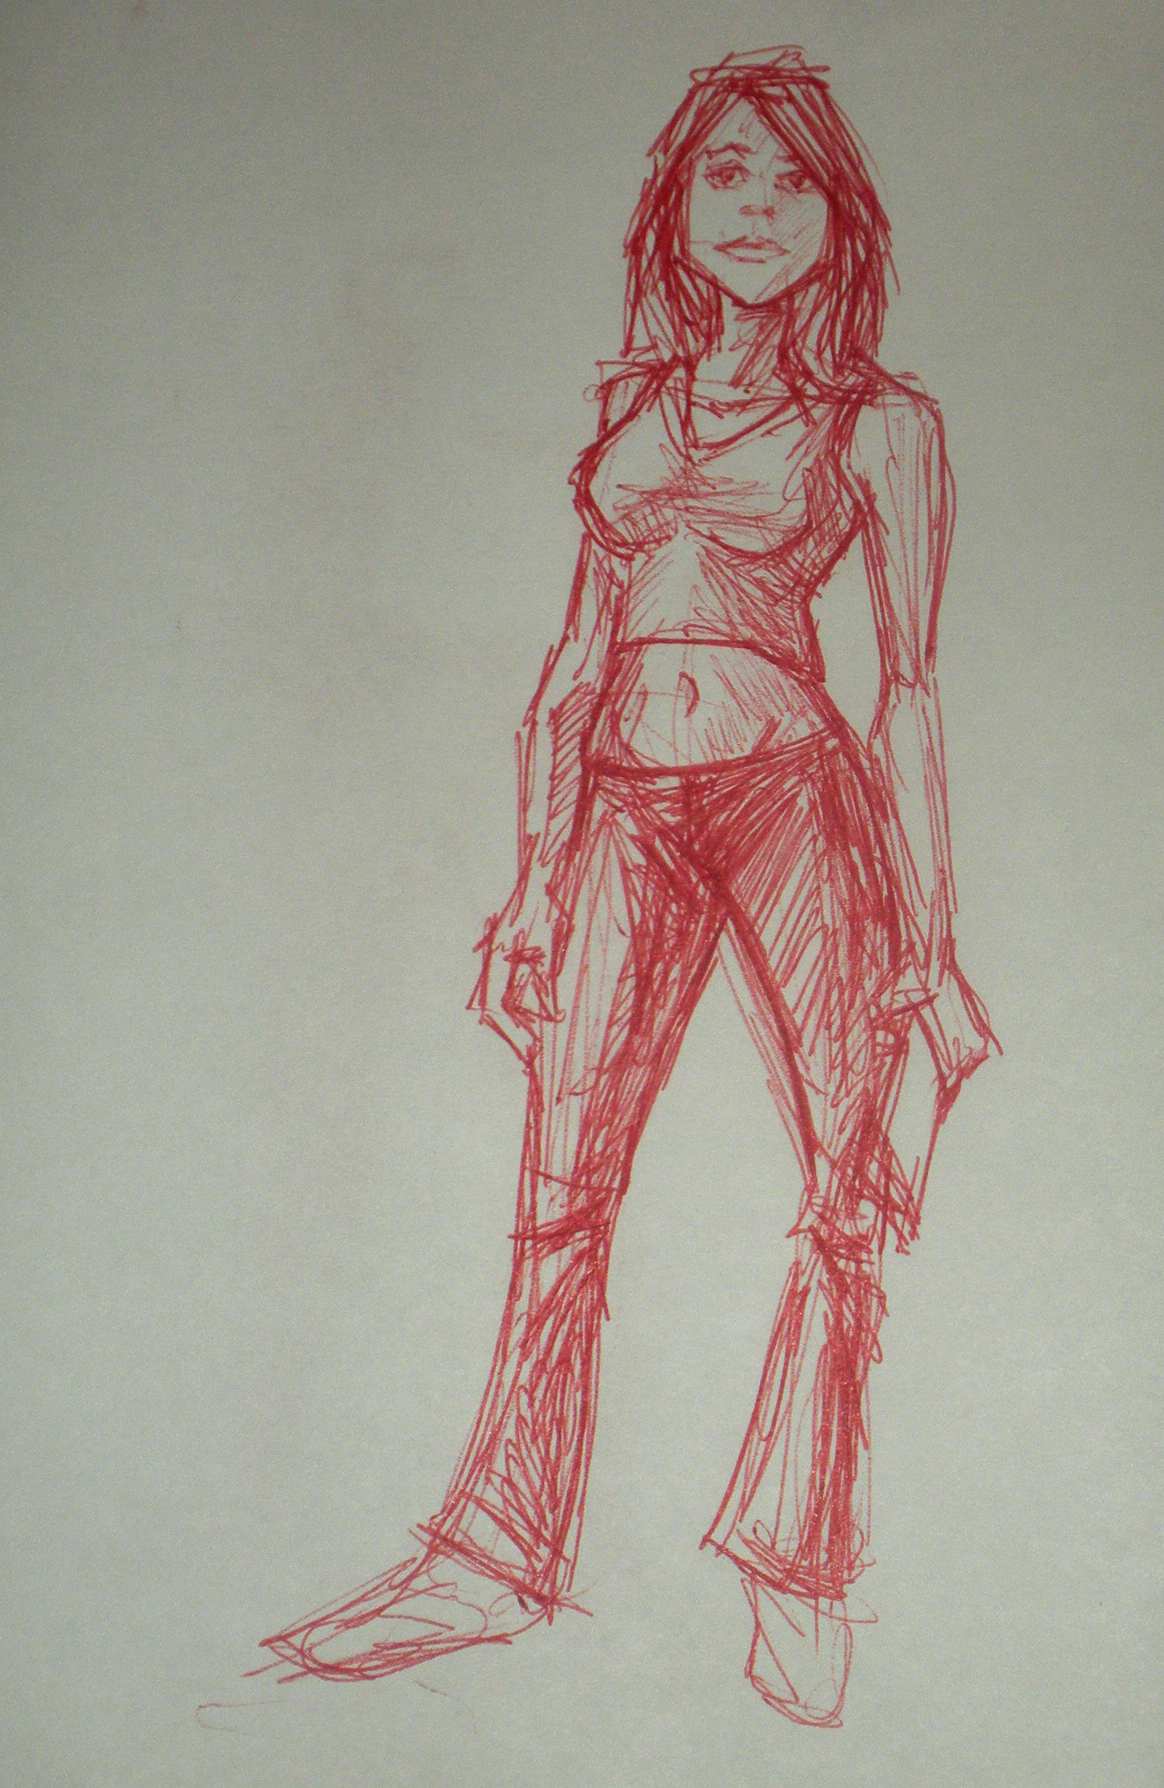 A study in red pen small